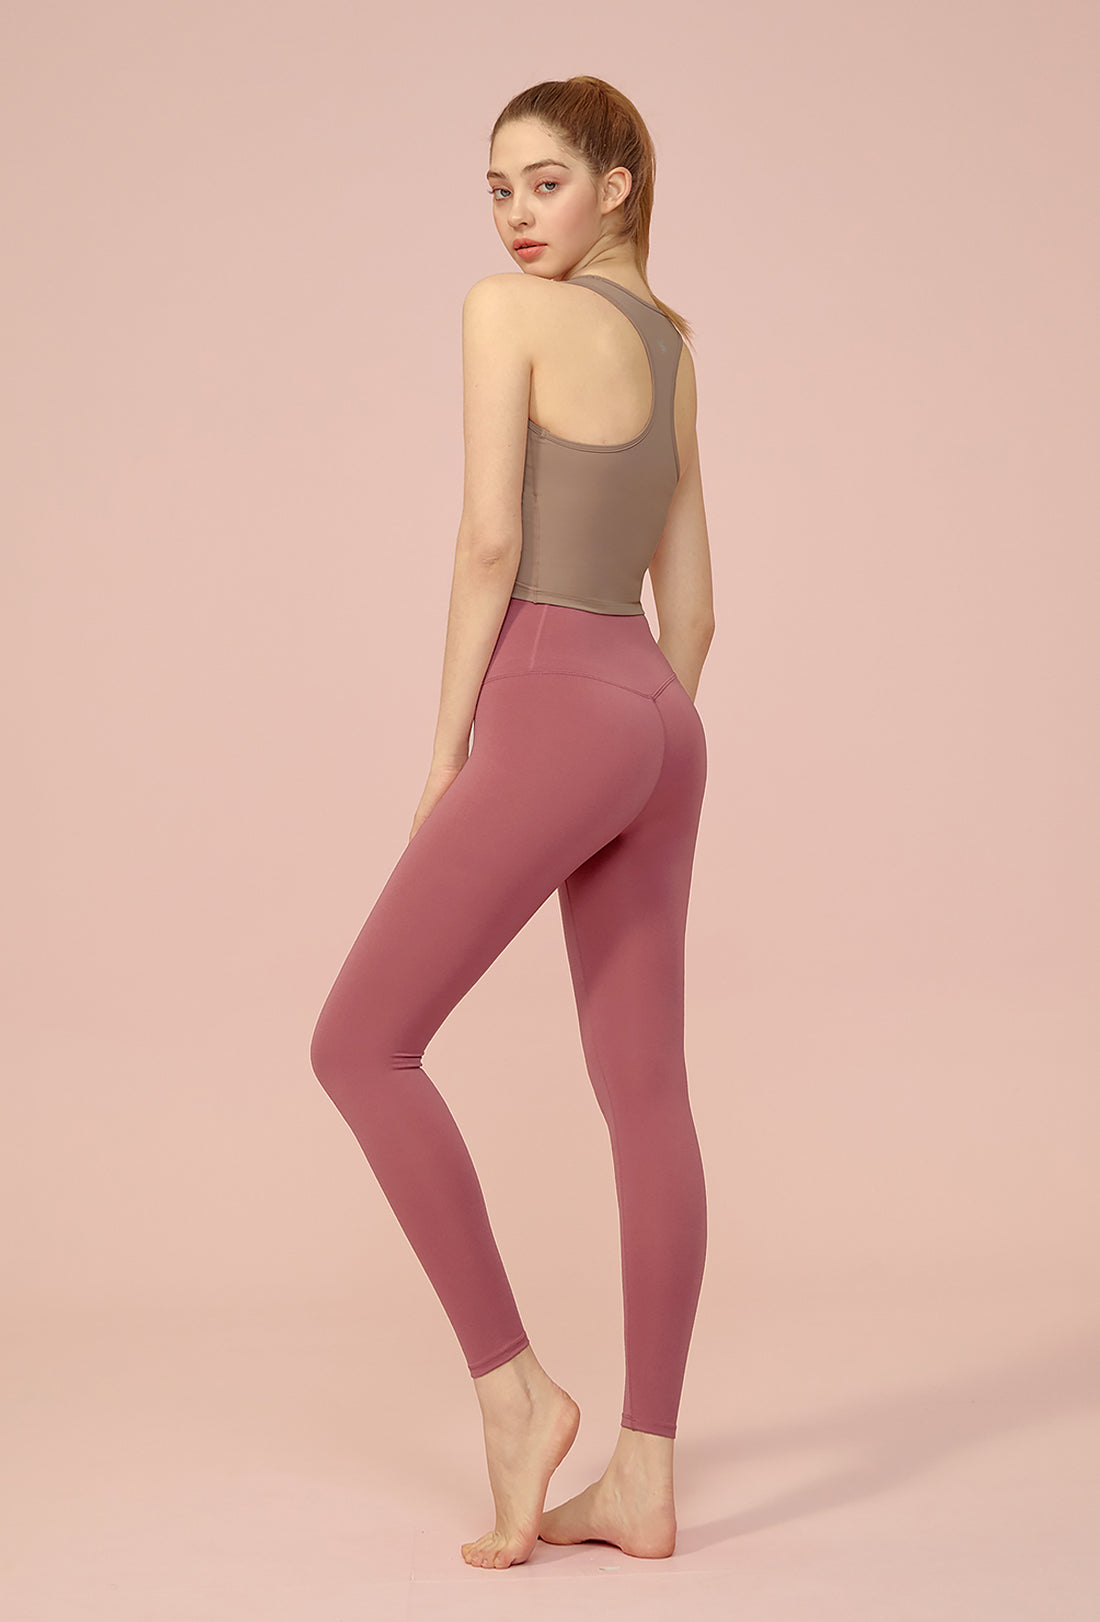 XEXYMIX Uptension Leggings - Chic pink